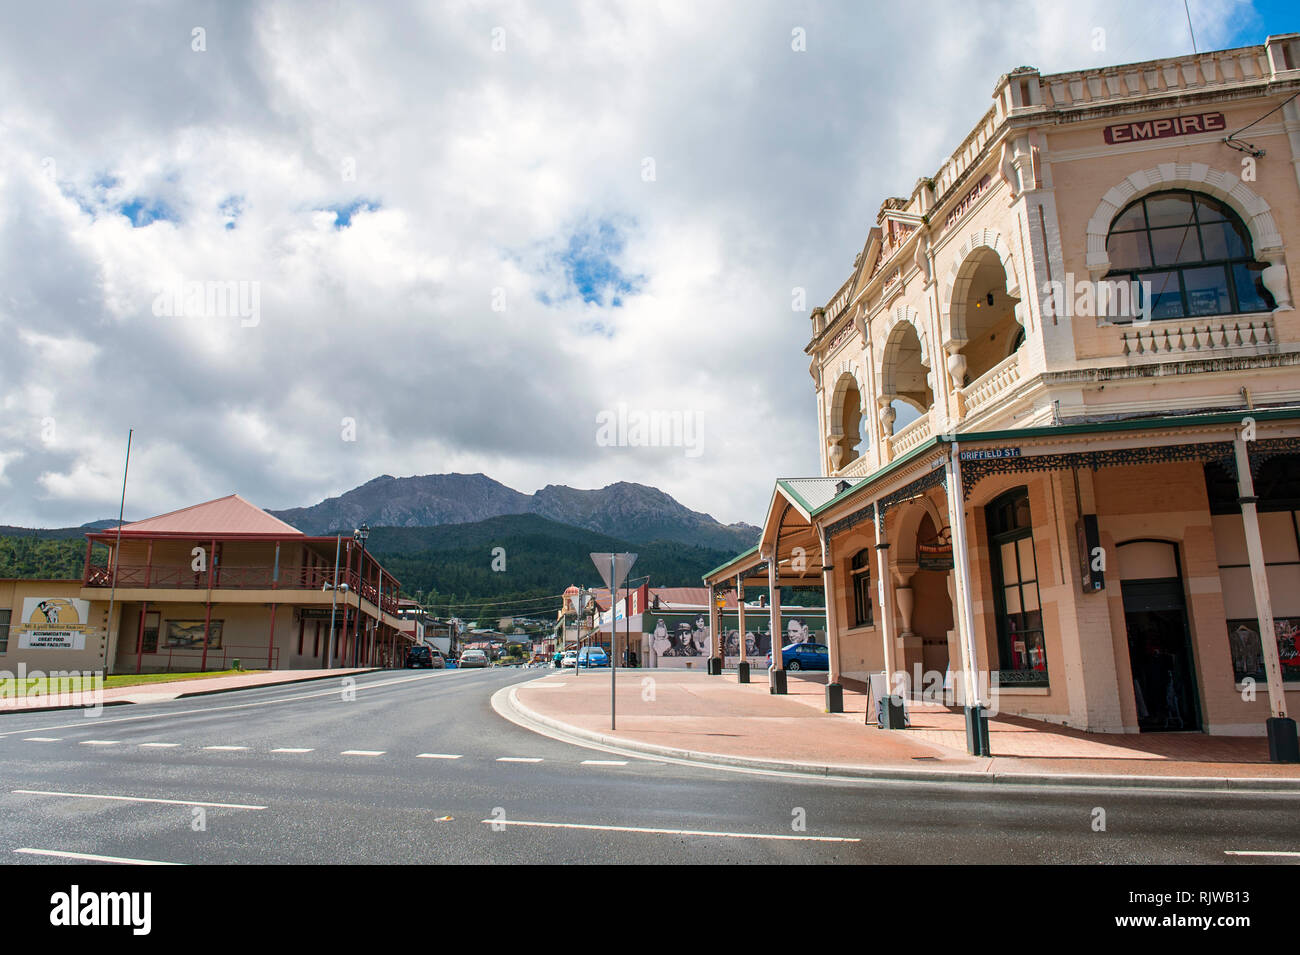 The Empire Hotel on the main street in Queenstown, a mining town and former home to Mt Lyell Mining Company, on Tasmania's West Coast, Australia. In i Stock Photo